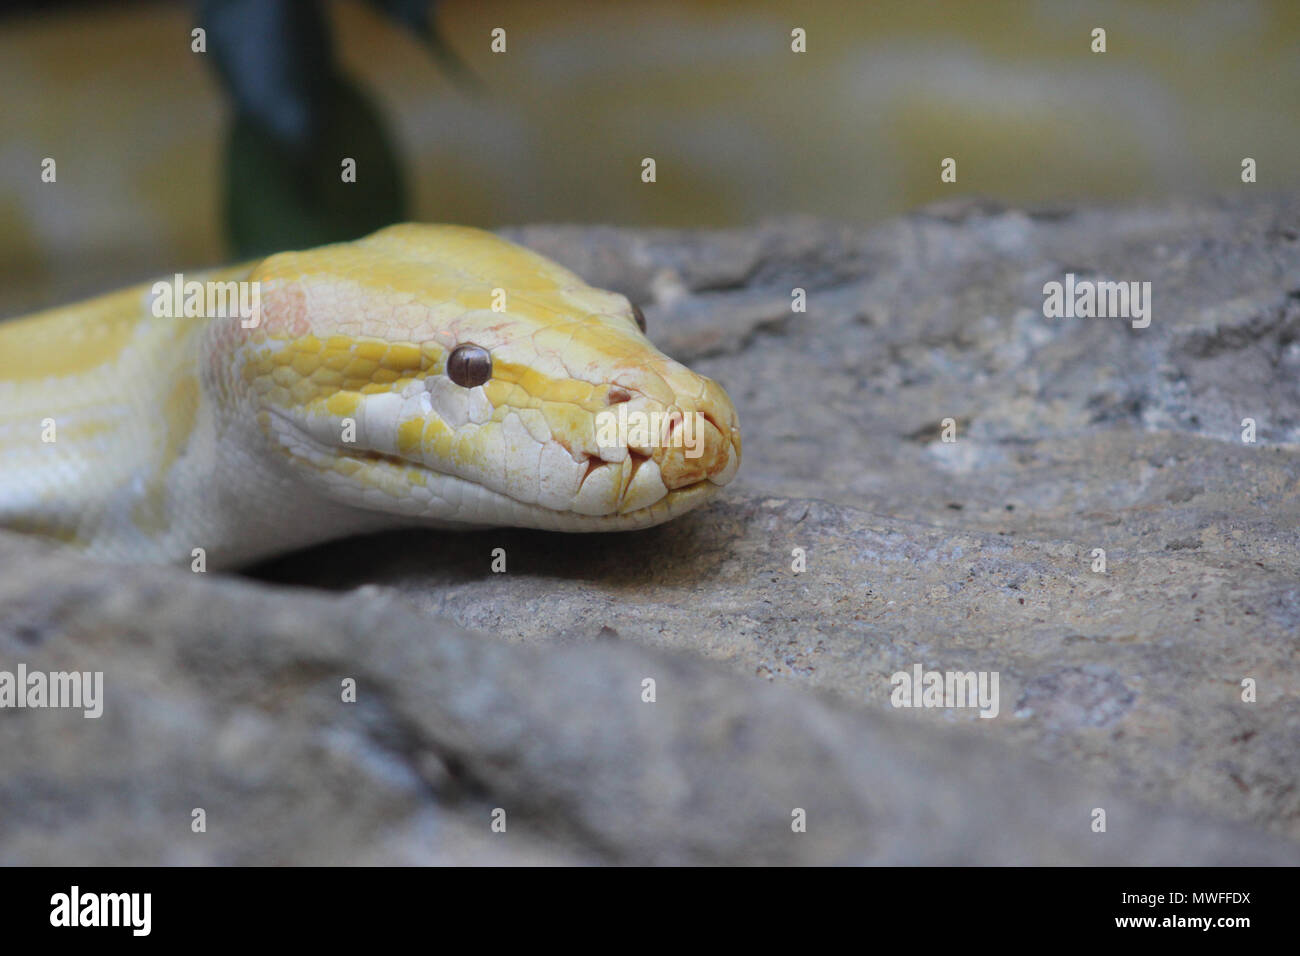 Albino snake slithering on a rock Stock Photo